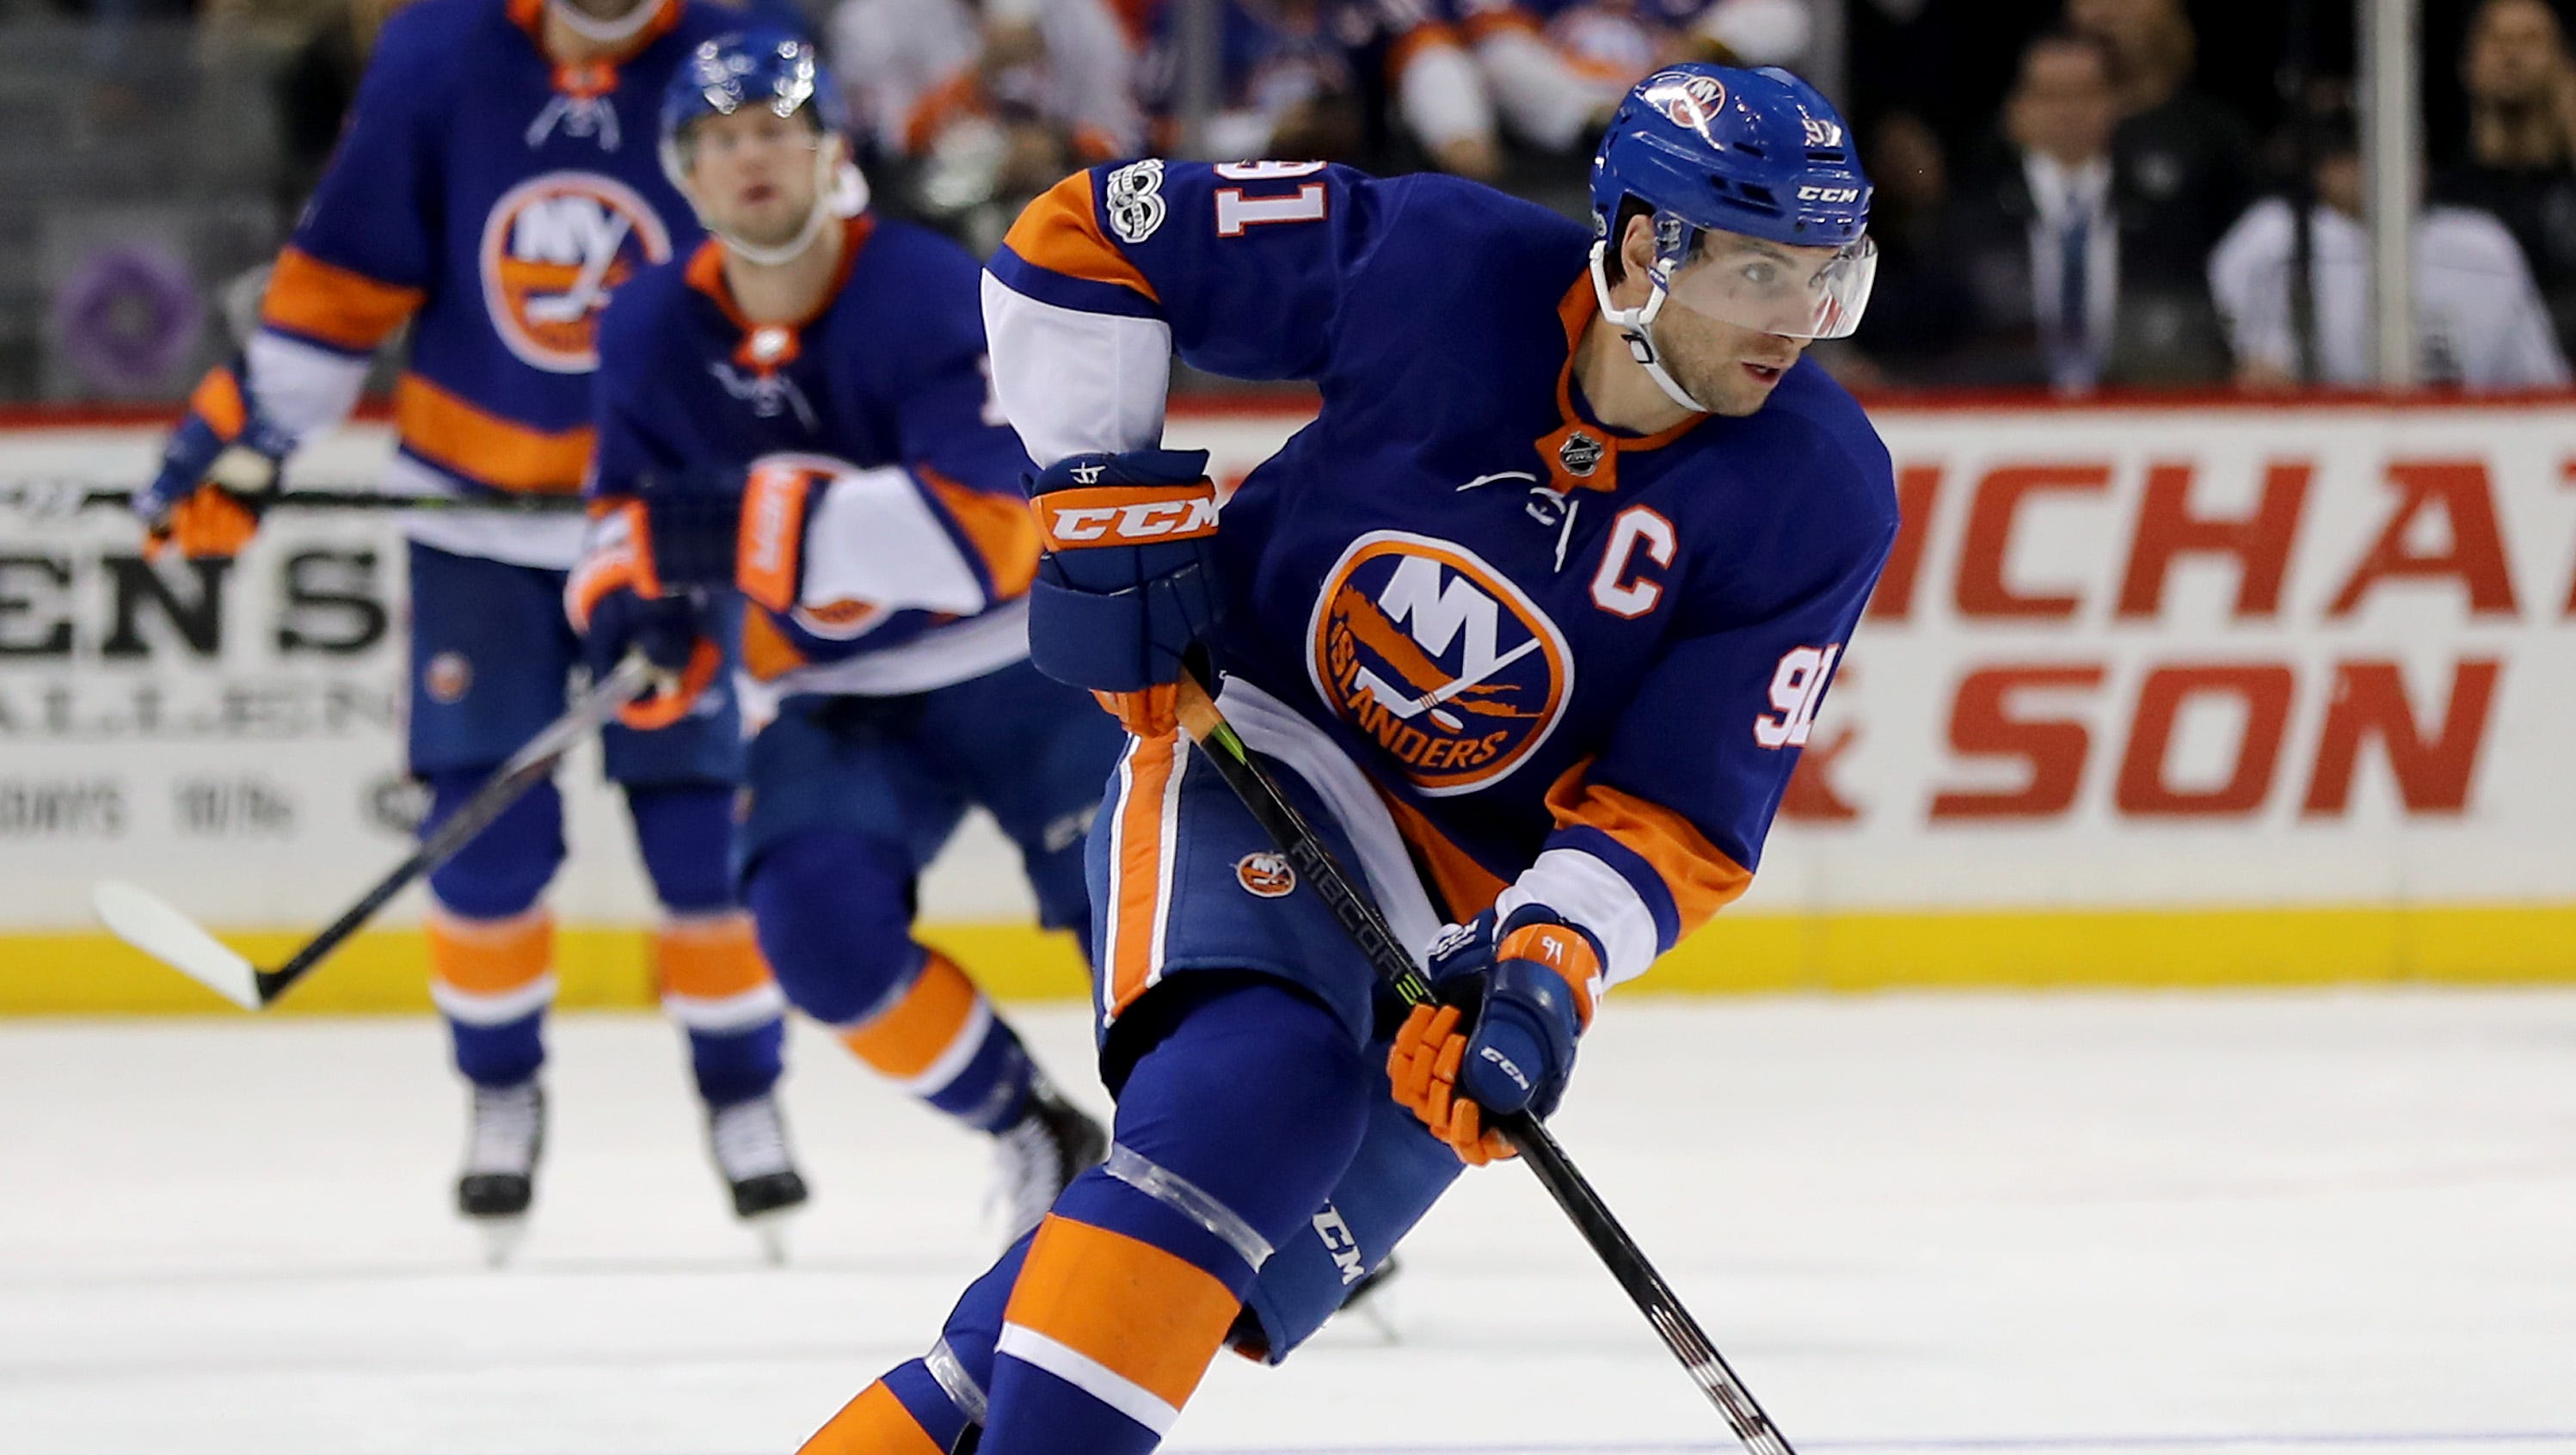 Go through the gallery to see The Detroit News’ top NHL free agents, including John Tavares, with analysis by Ted Kulfan.